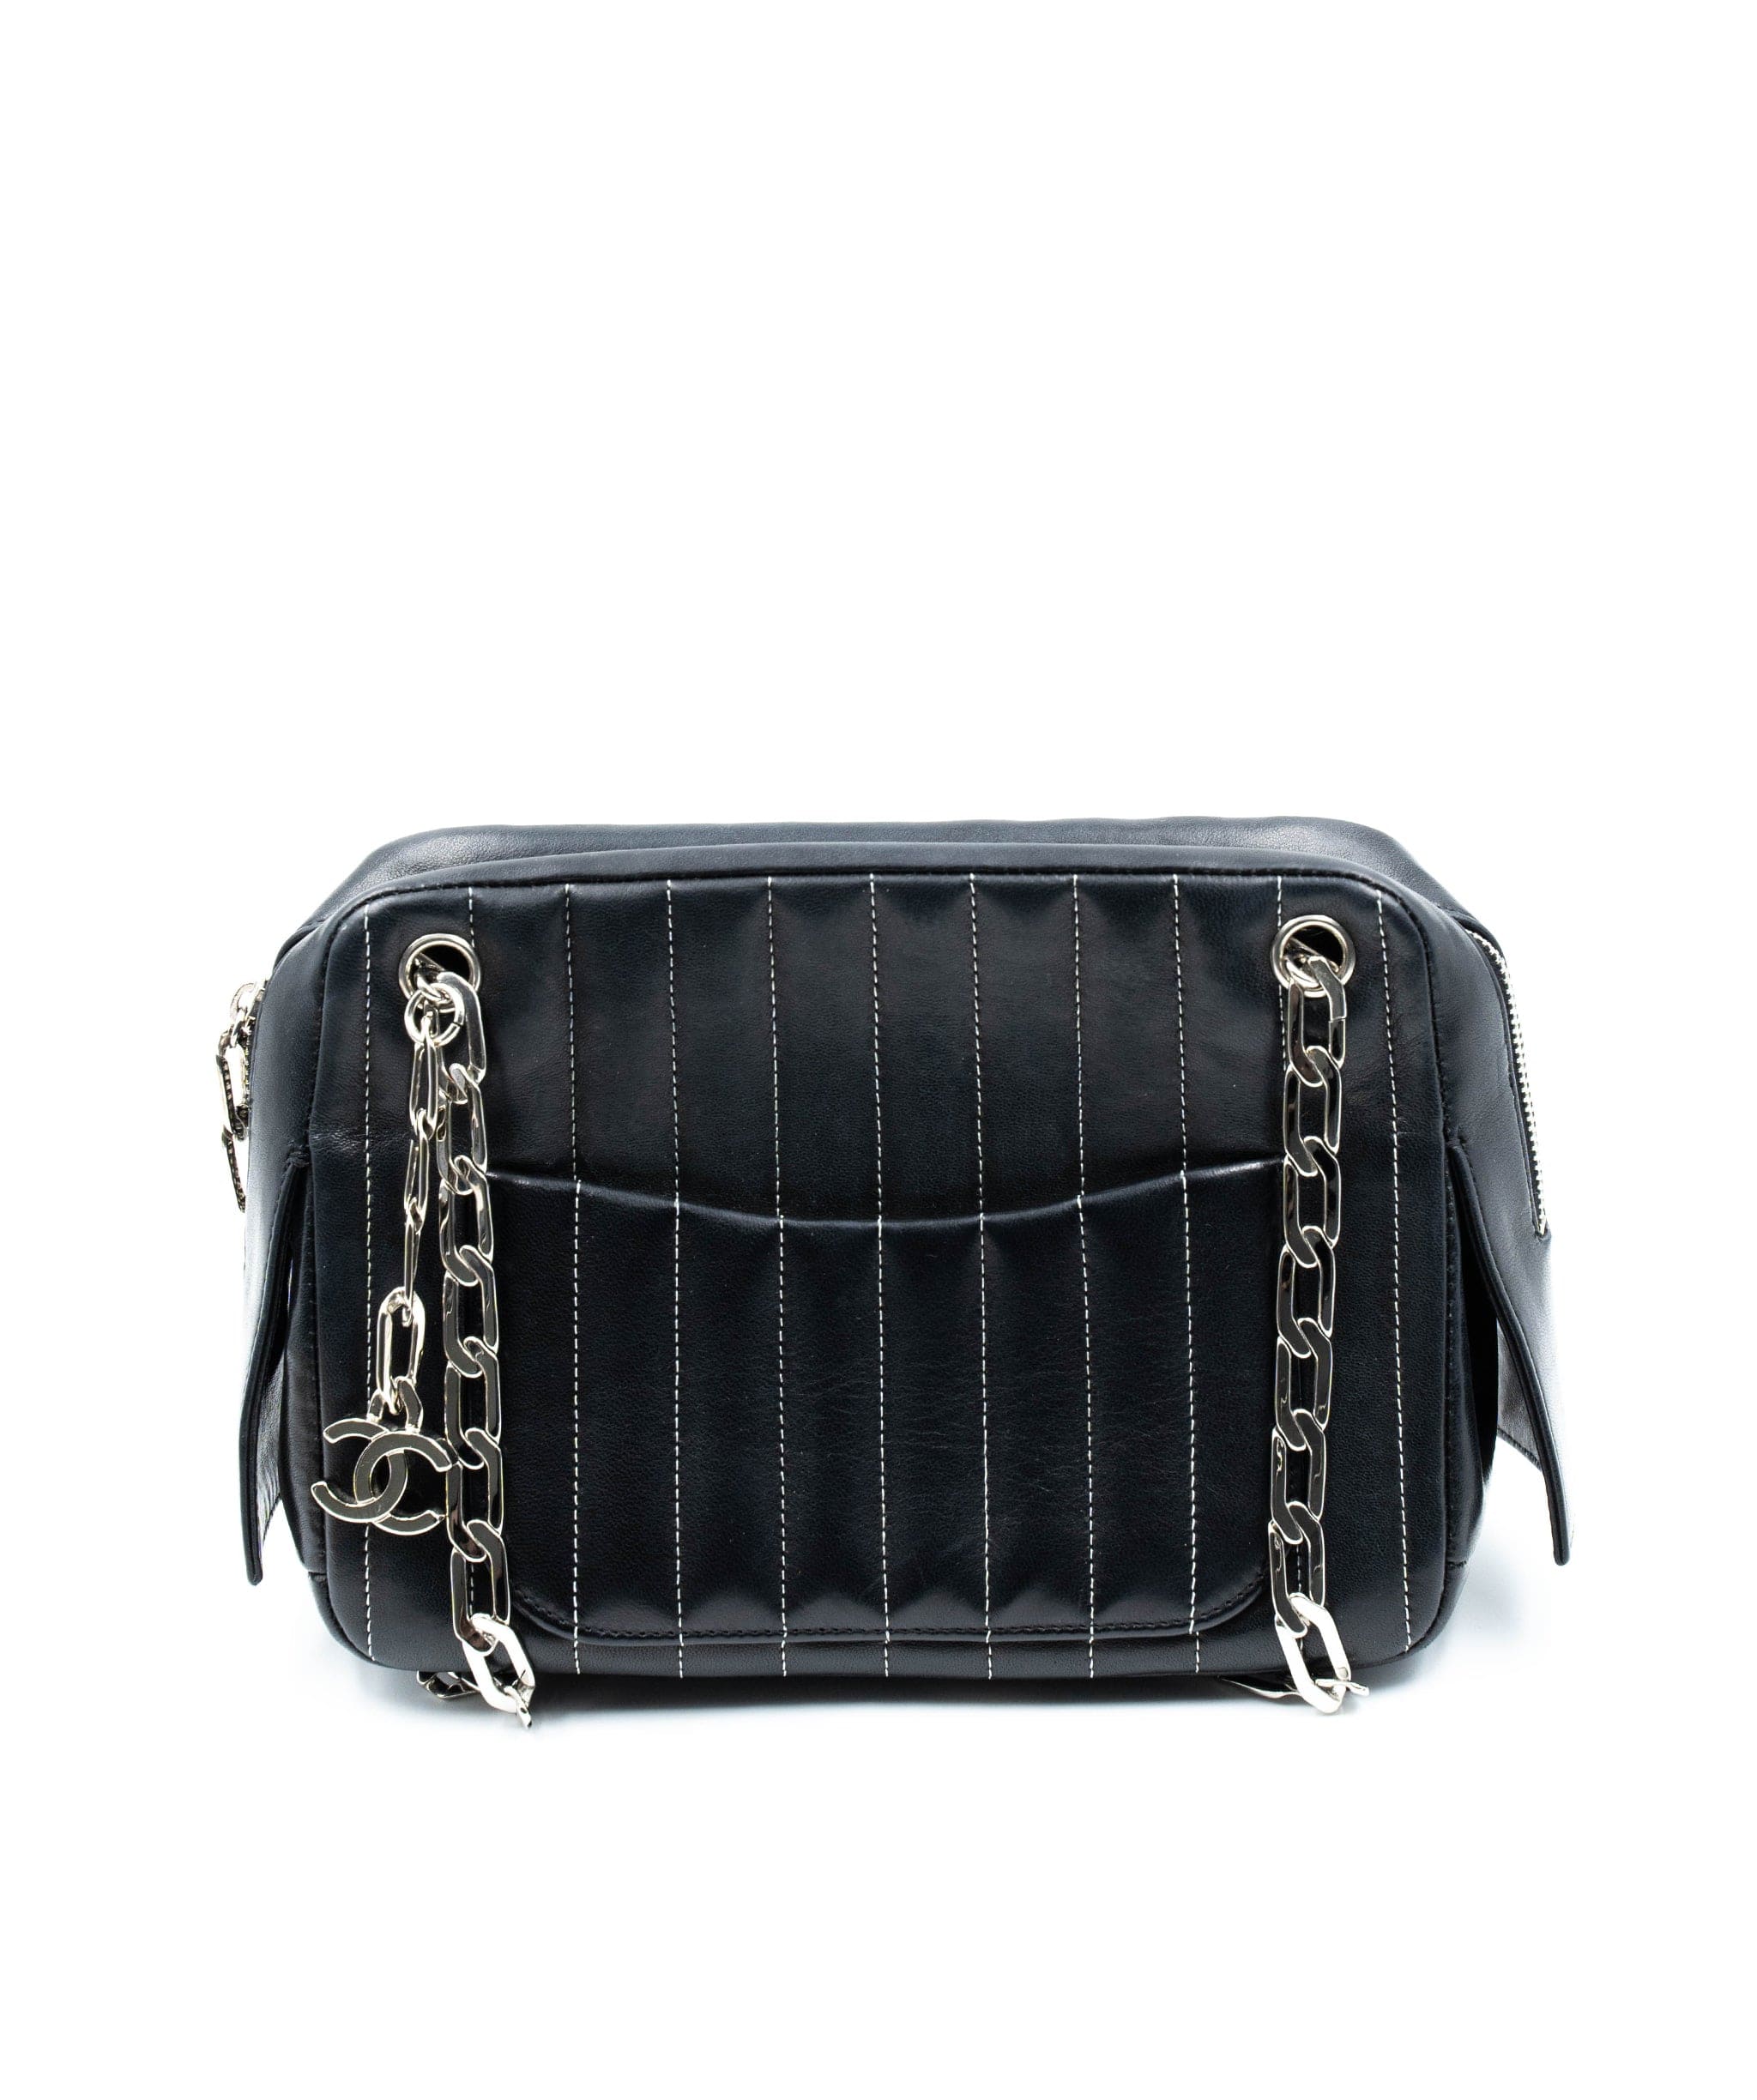 Chanel Mademoiselle Black bag with silver hardware - AWC1180